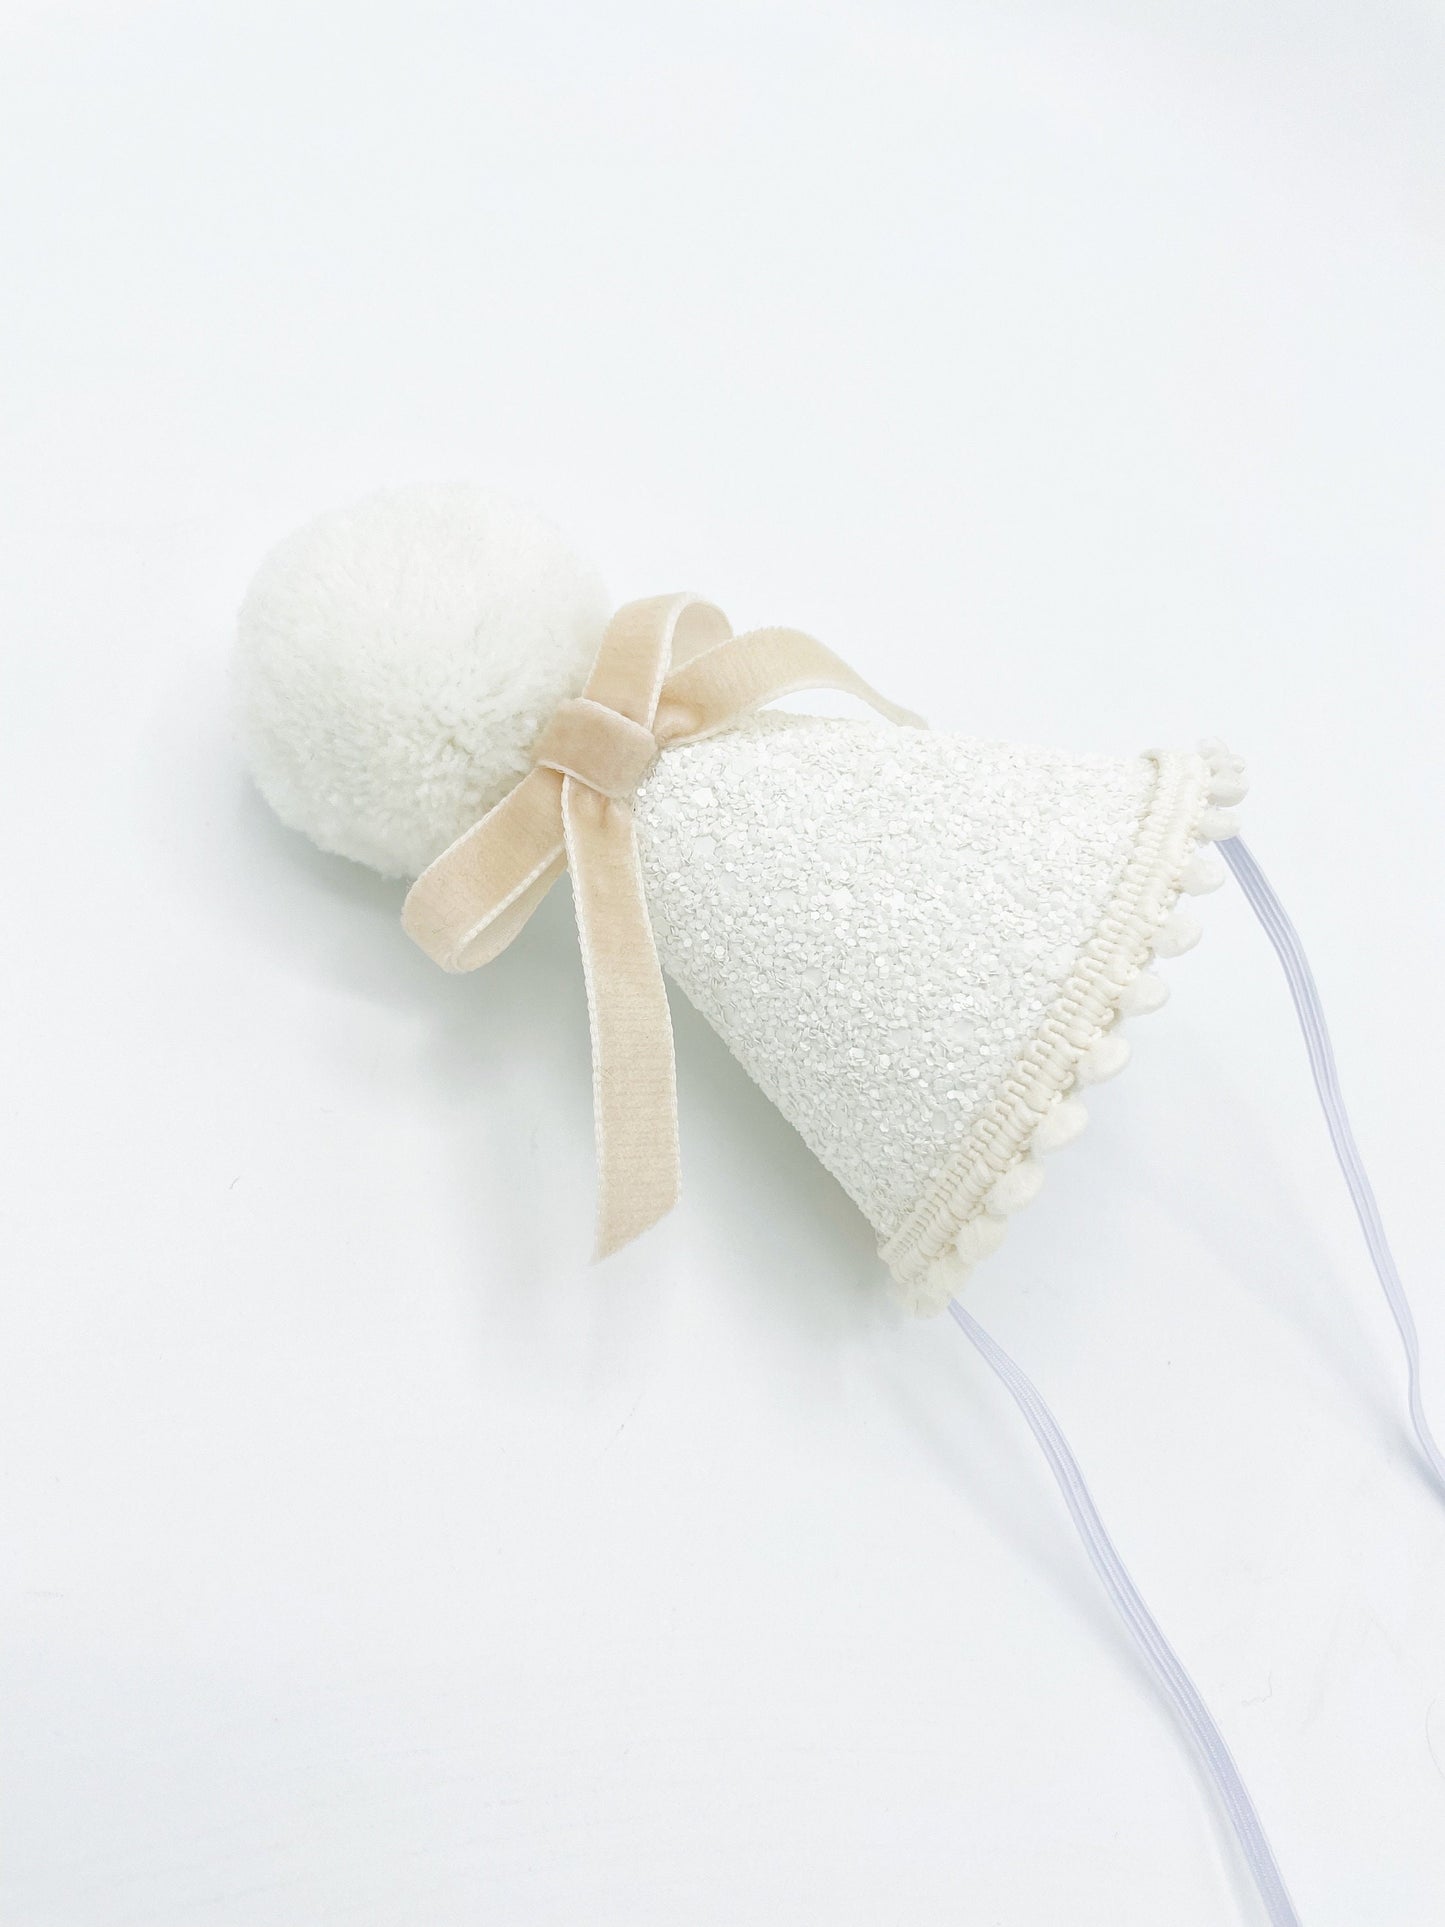 pearl white glitter with biscuit coloured bow complete with white trim and Pom.